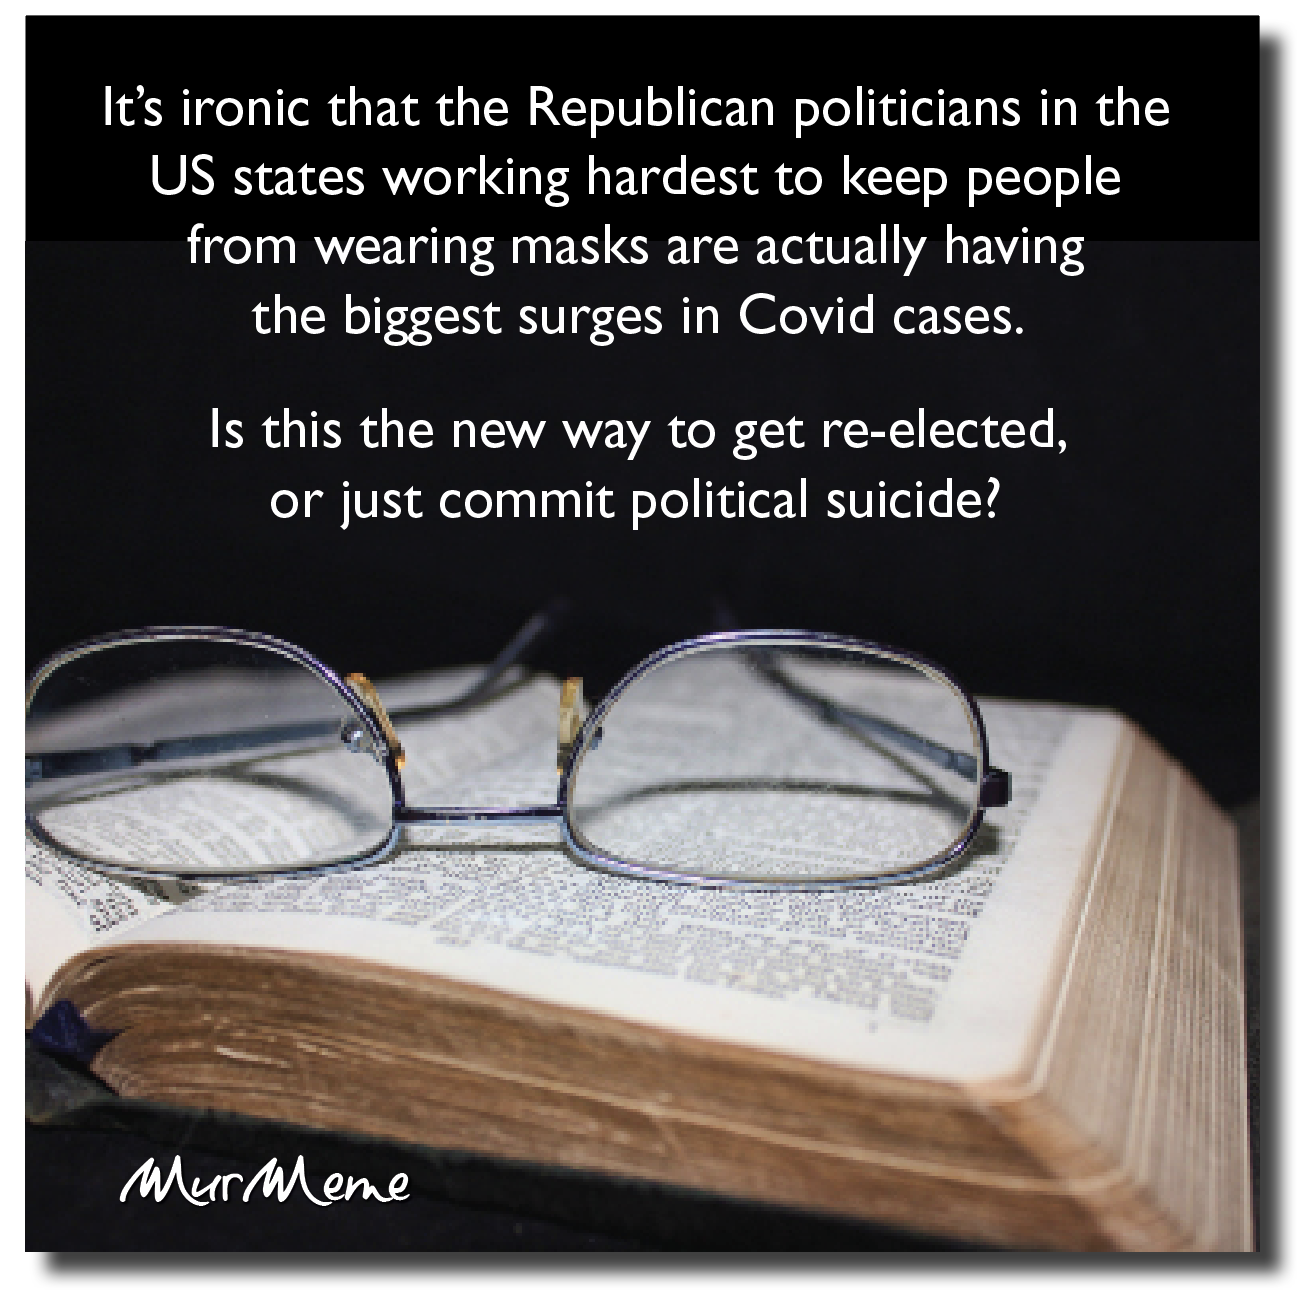 It's ironic that the Republican politicians in the
US states working hardest to keep people
from wearing masks are actually having
the biggest surges in Covid cases.

Is this the new way to get re-elected,
or just commit political suicide?